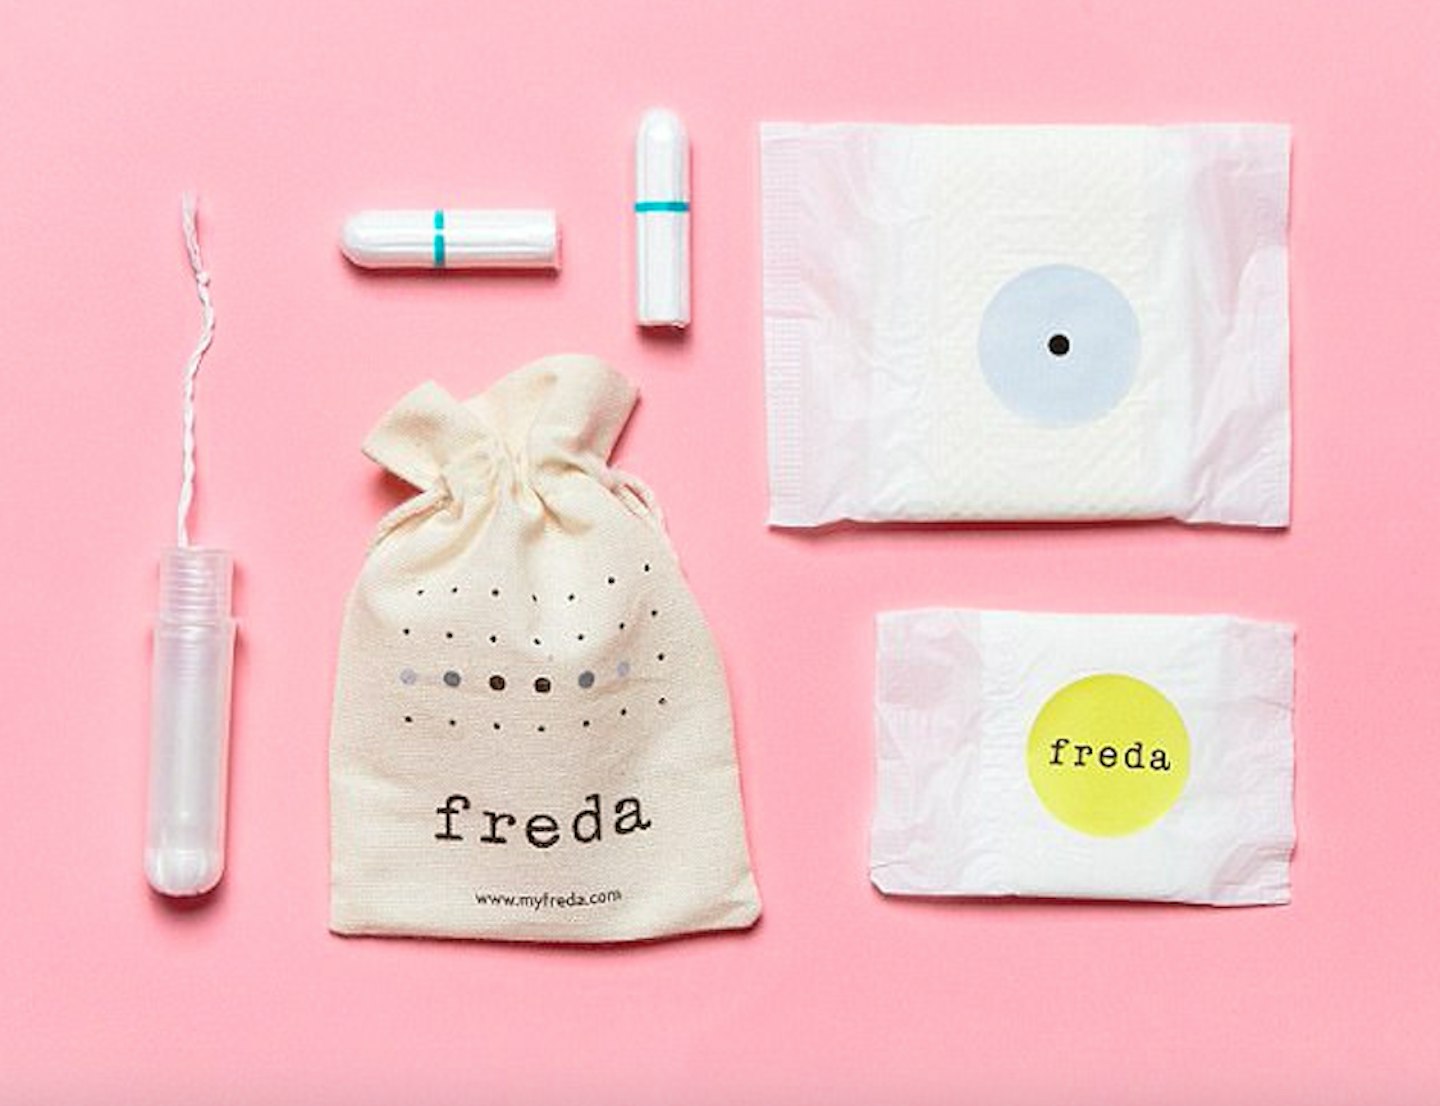 Freda Subscription Boxes, from £10.50 a month